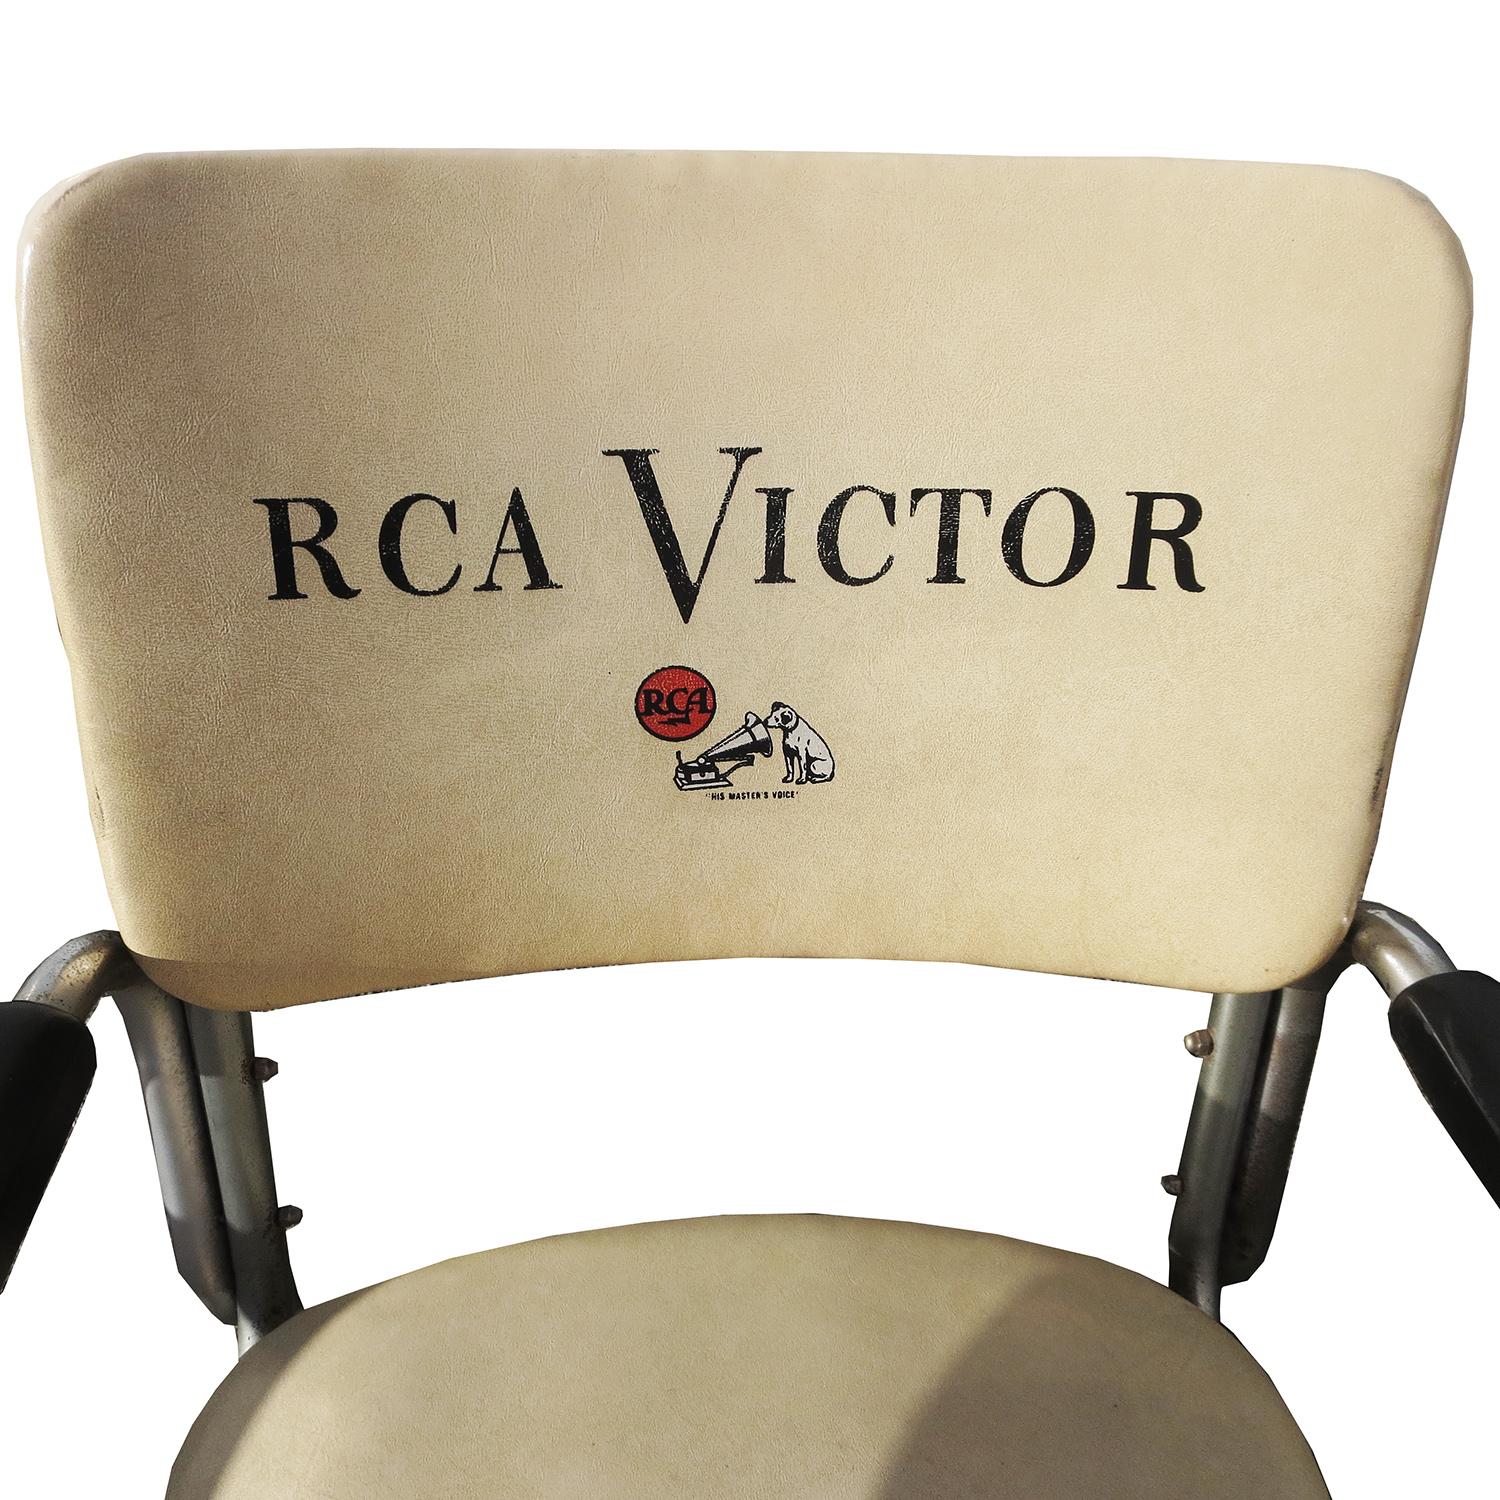 RCA, the Radio Corporation of America, was a powerhouse in the music, radio and television industry. There was hardly a home in America that didn't have a product made by the company. These advertising chairs were placed in the offices and recording